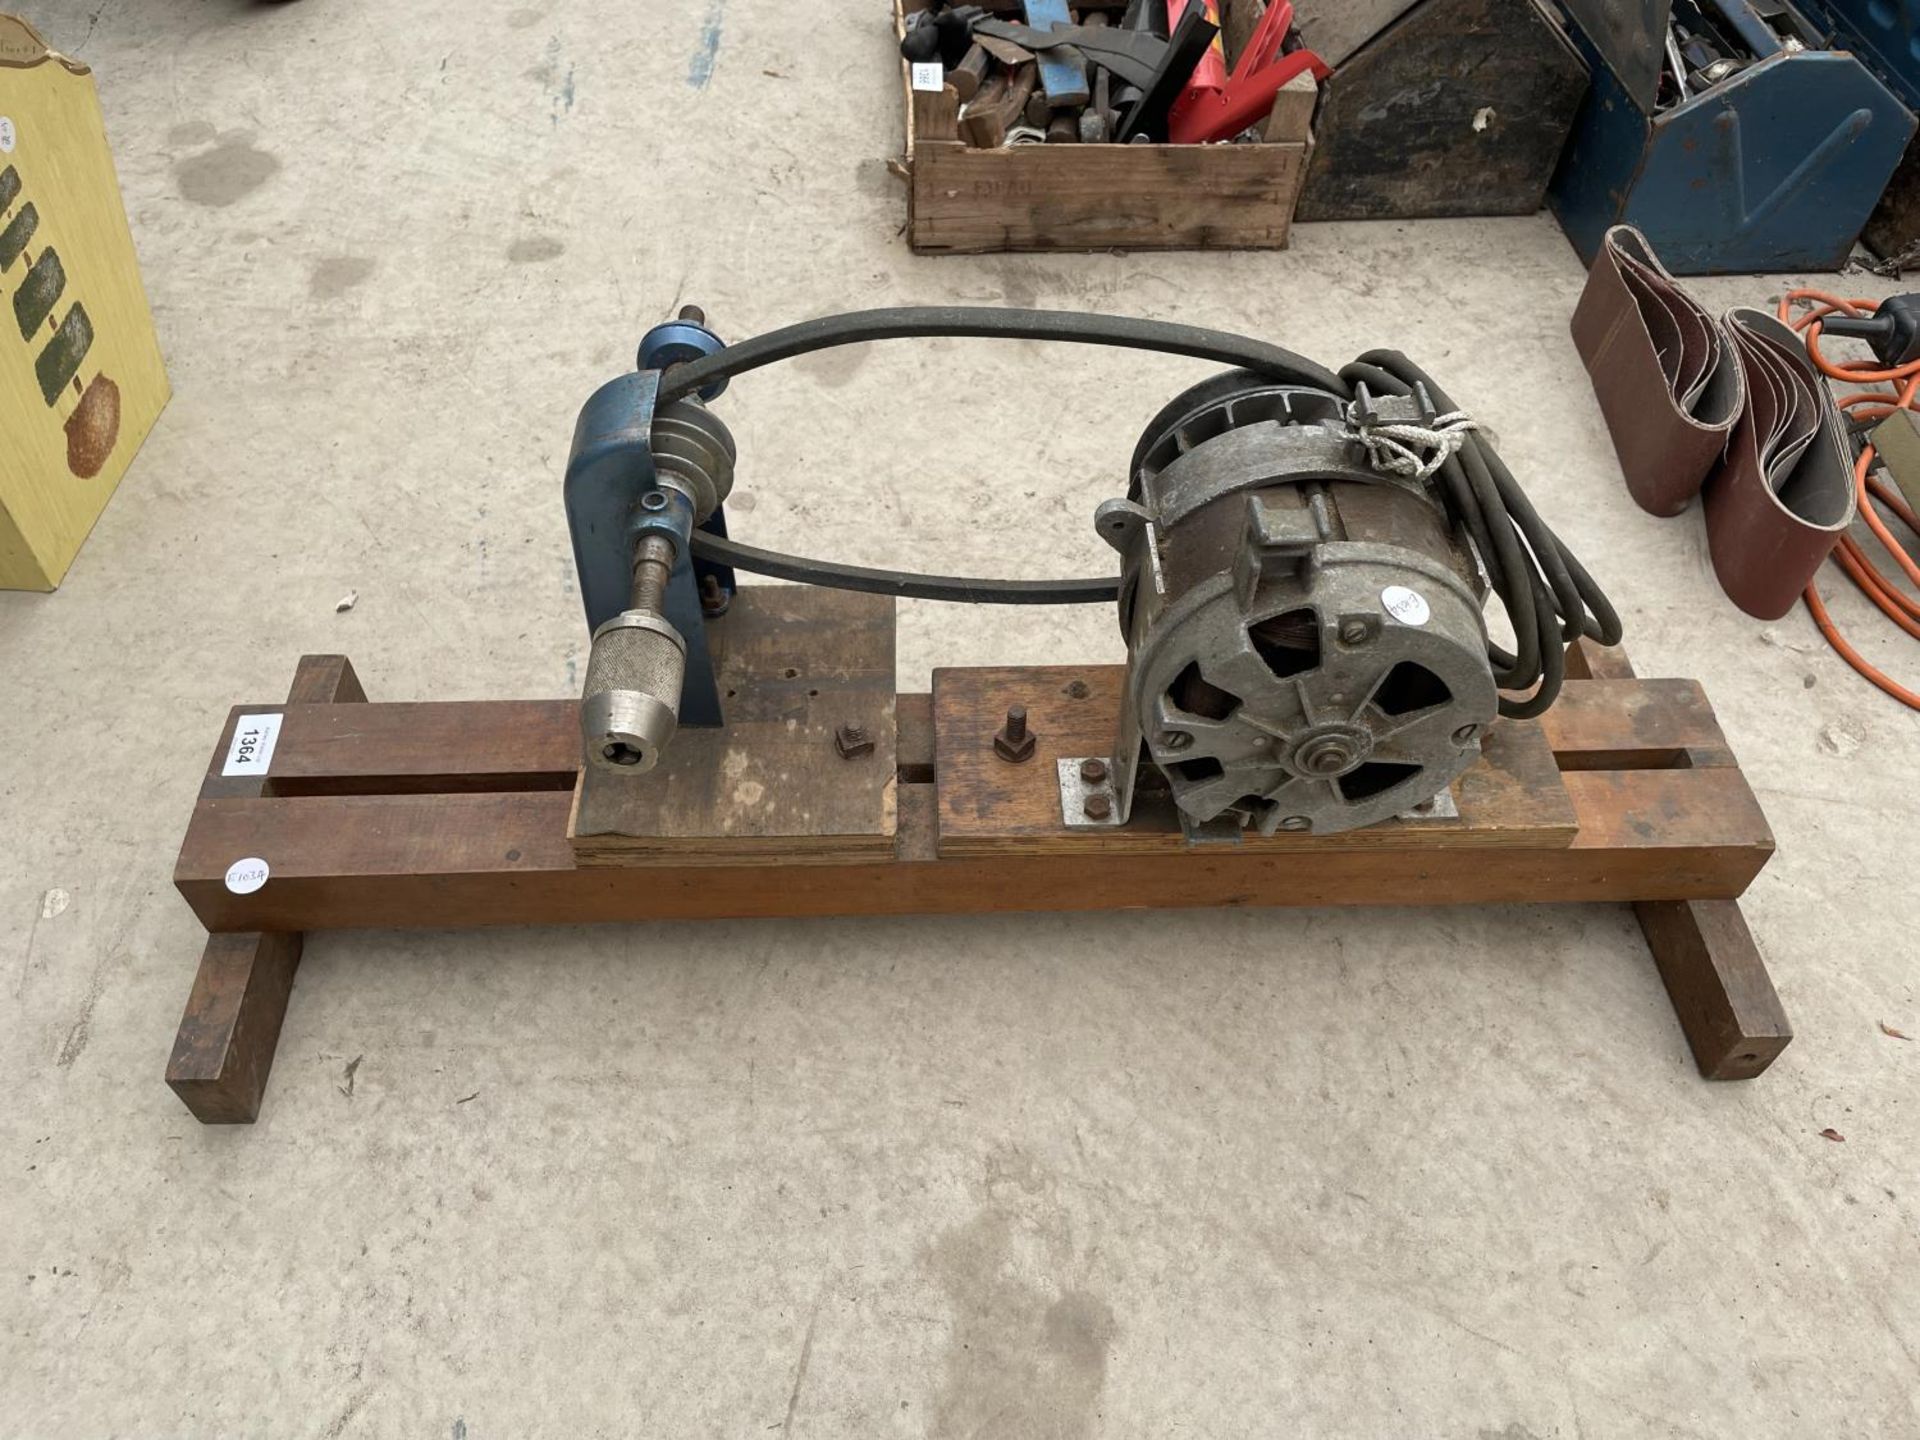 A MOTOR WITH A BELT DRIVEN DRILL